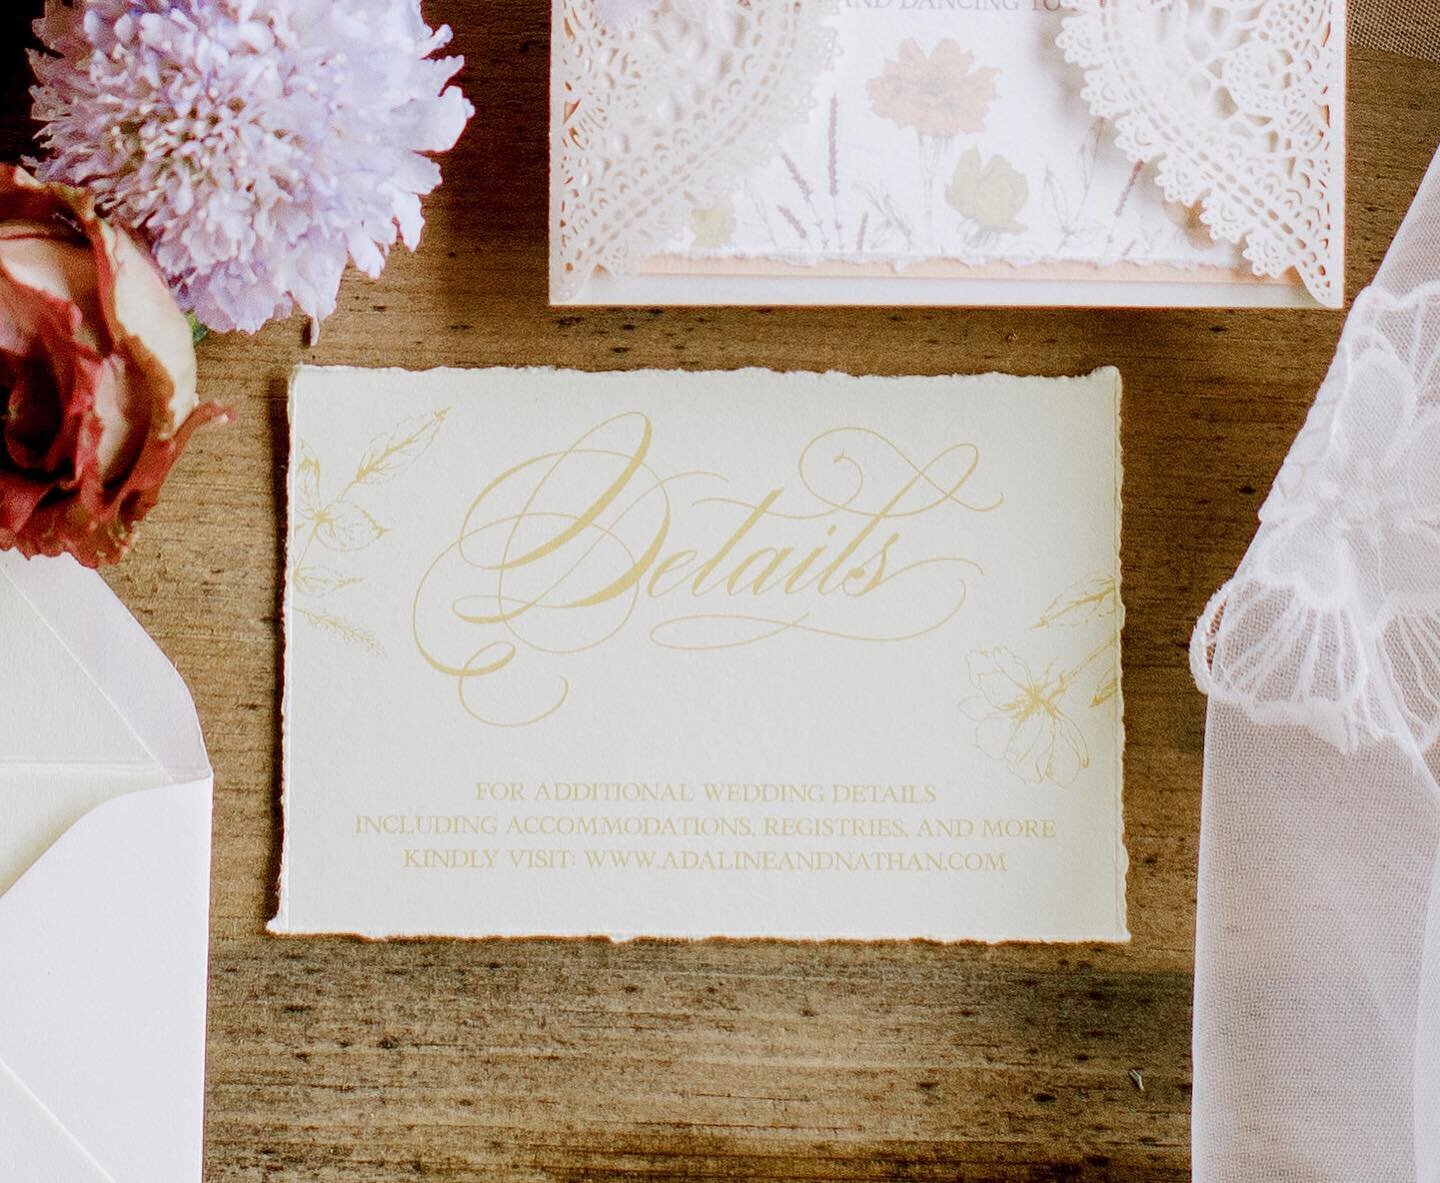 Spot calligraphy made for a pretty wedding details card in collab with
stationery designer: @matinaedesignstudio 

#spotcalligraphy #weddinginvitations #digitallettering #weddingstationery #weddingcalligraphy 

Photography: @vicandsasha 
Event planni